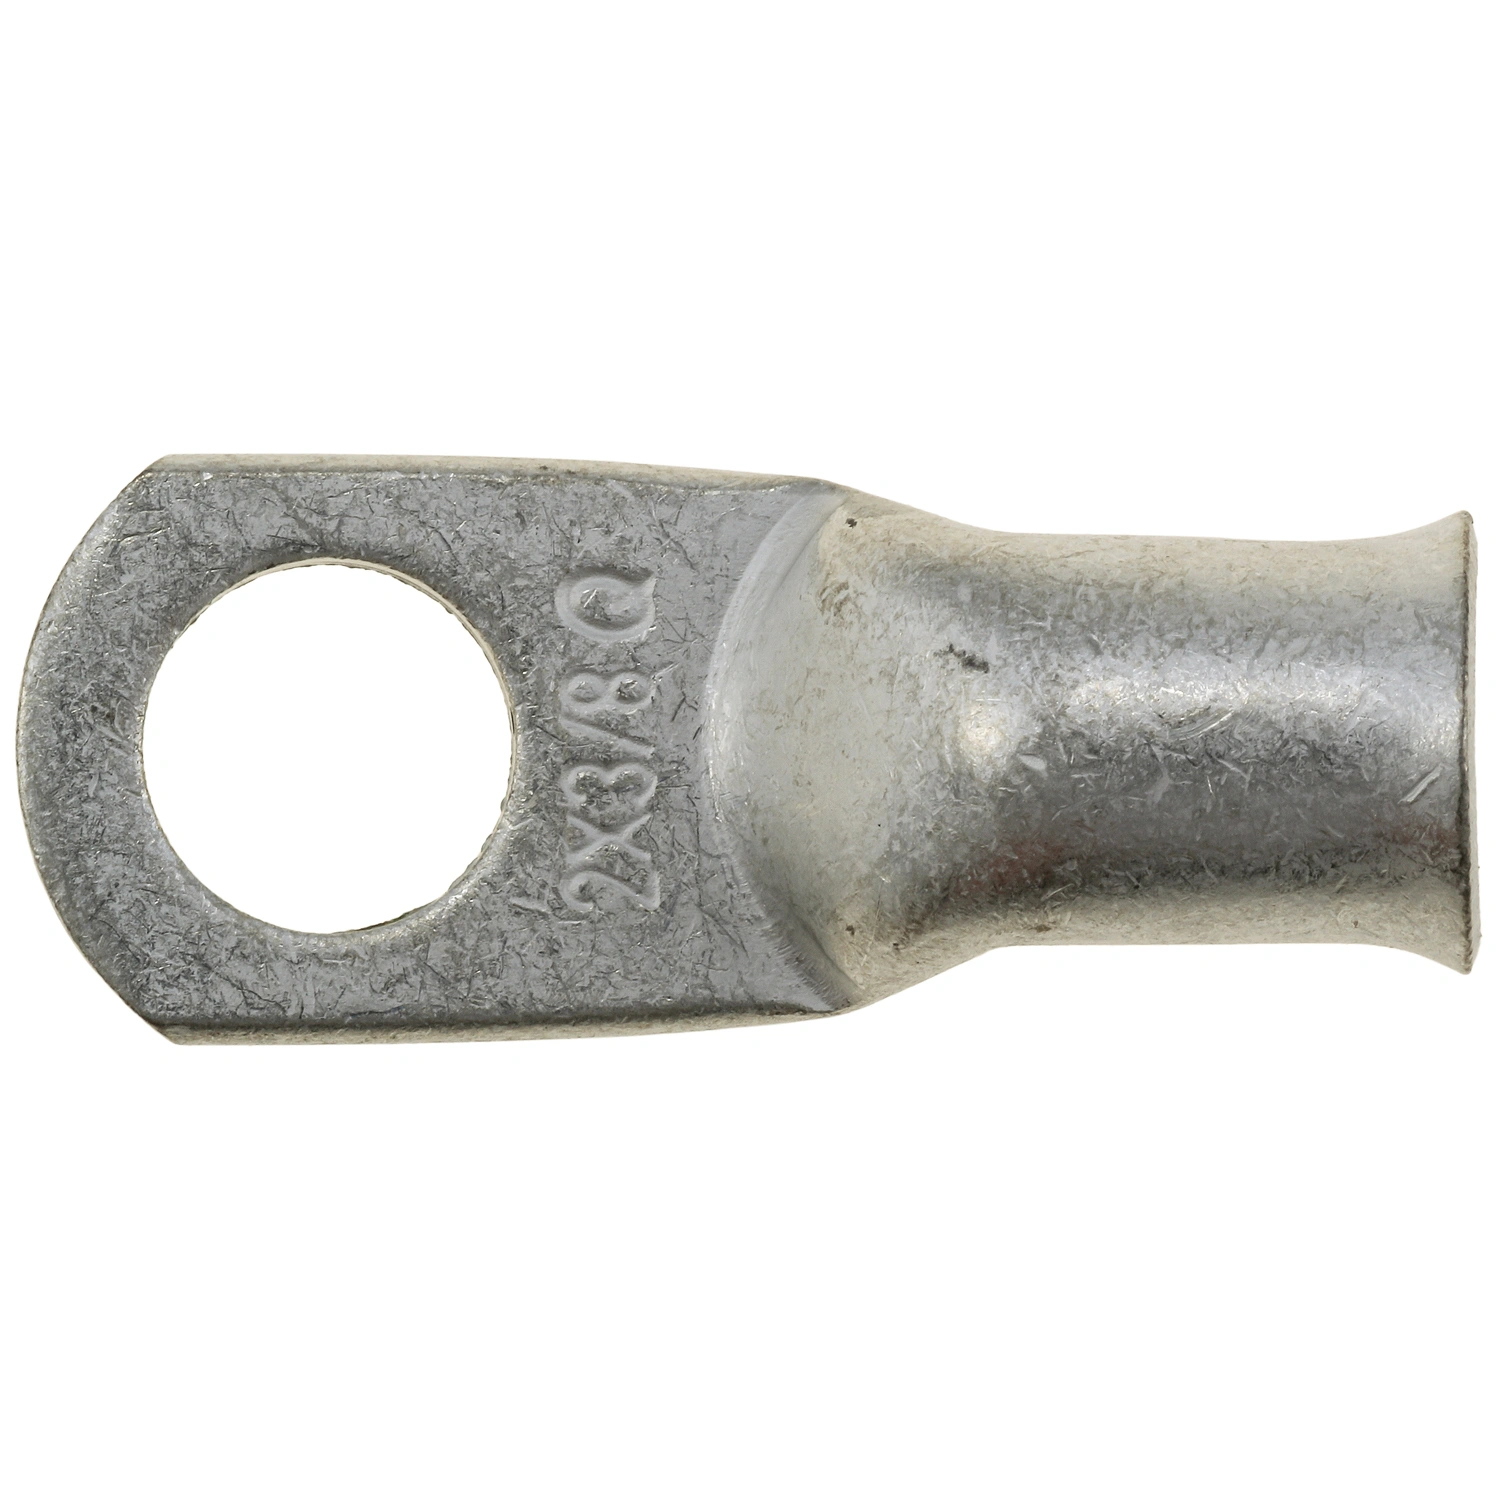 An image of a 2AWG Quick Cable Max Lug, 3/8" Stud with a hole in it.